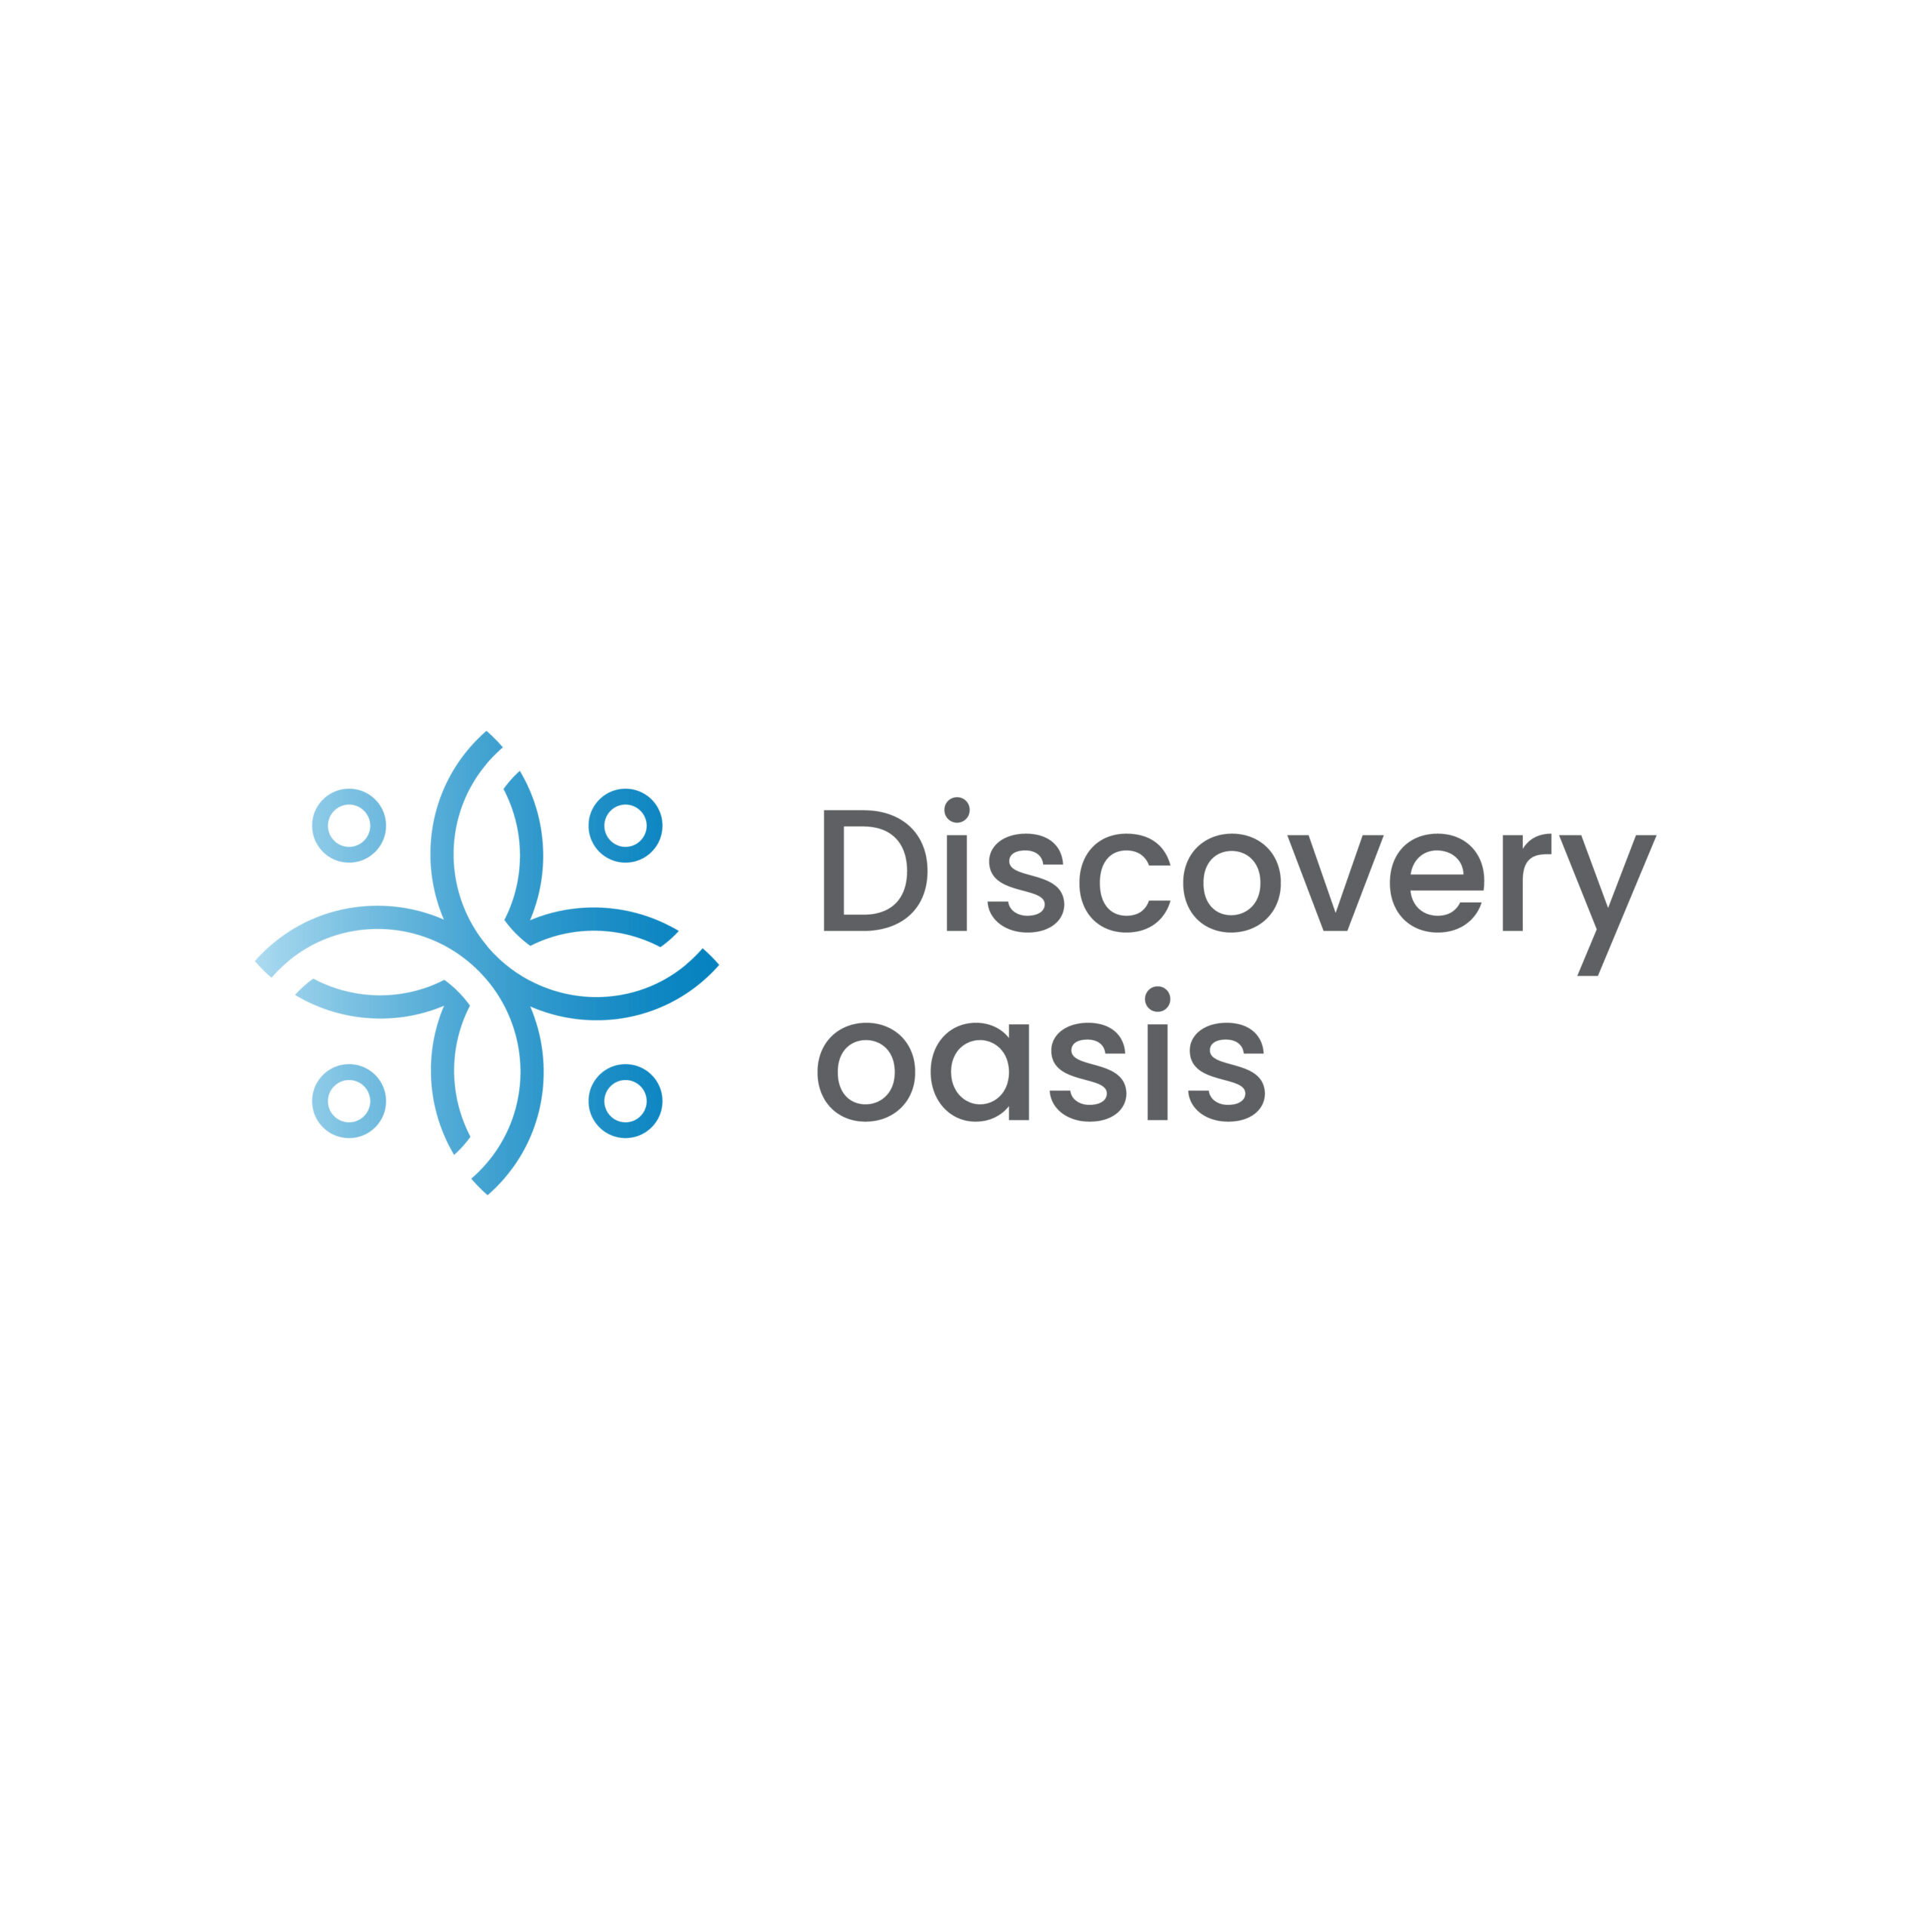 Discovery-oasis-logo-variations-01